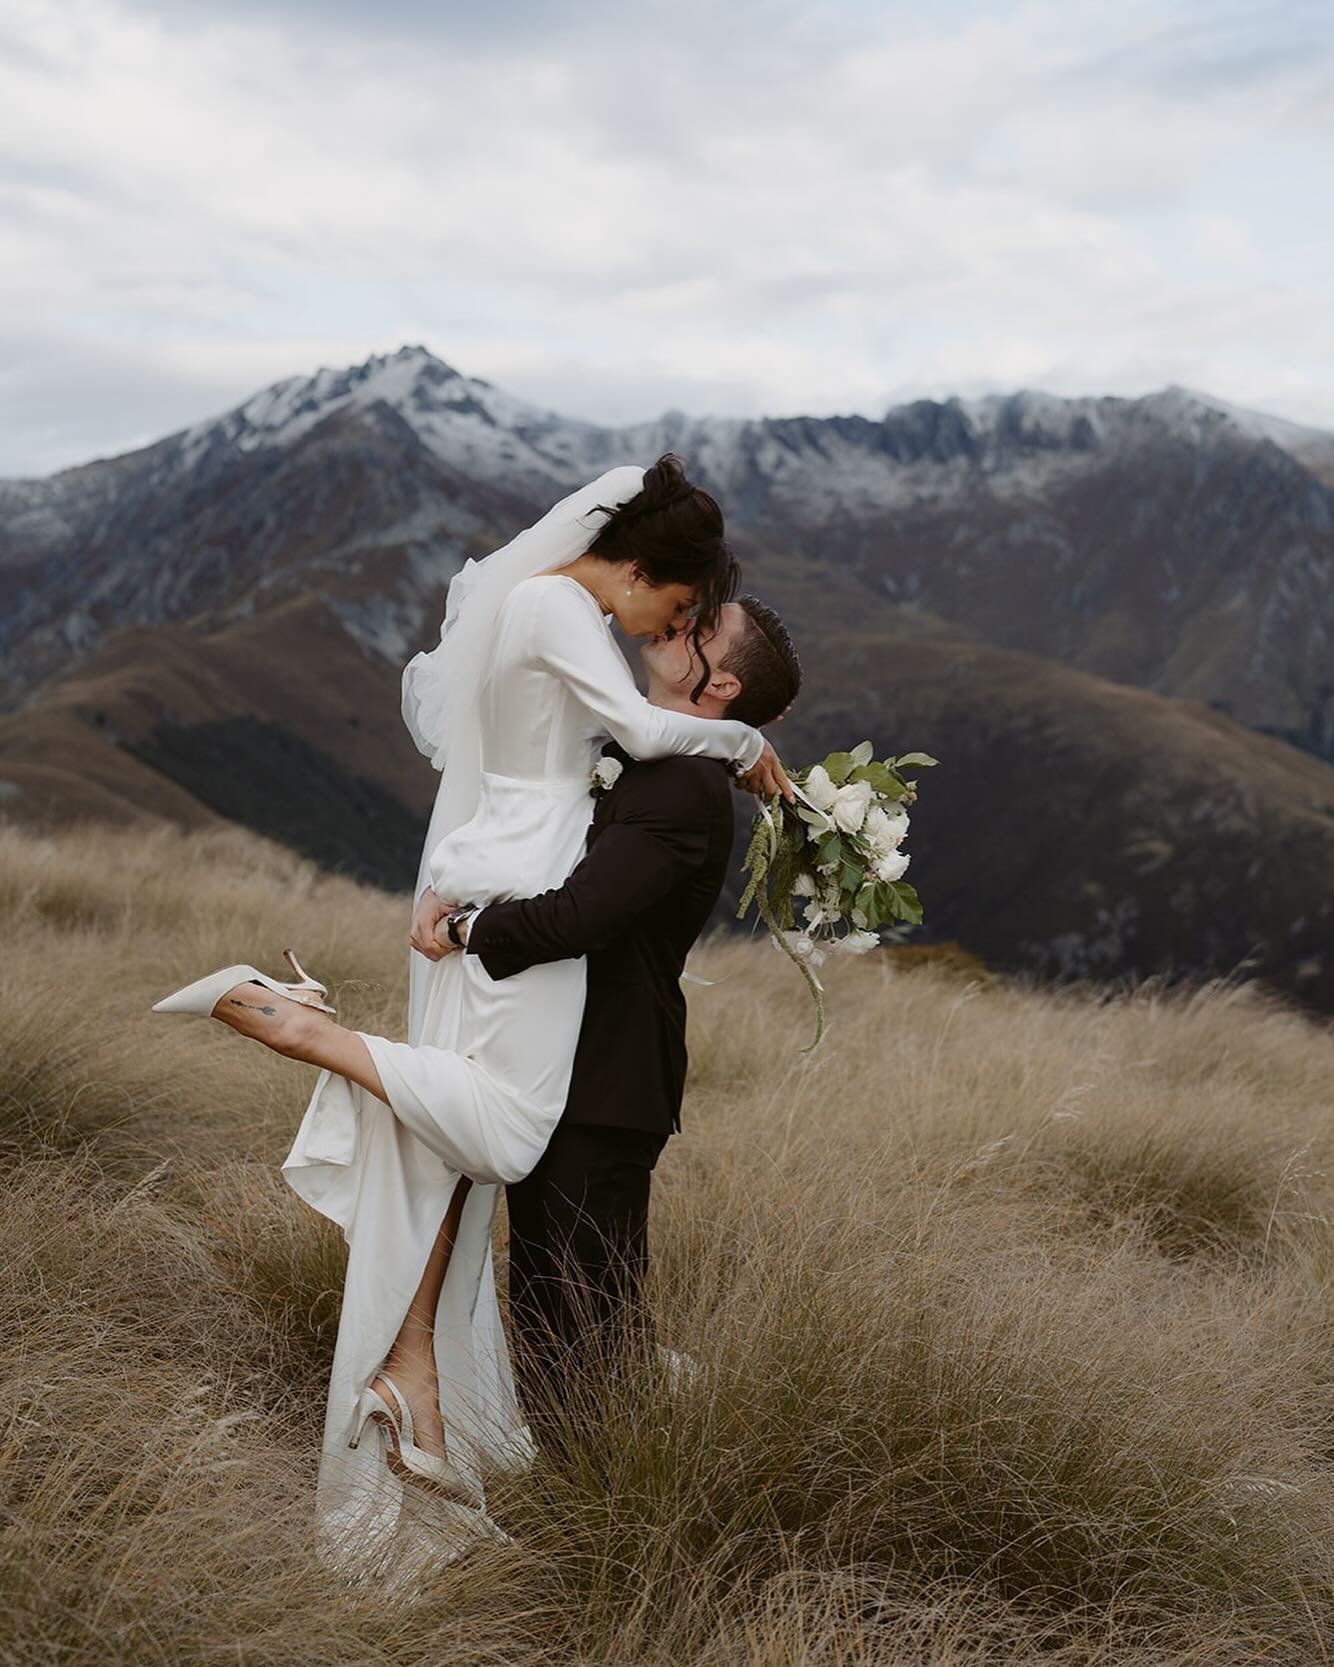 The stunning Kiah and Adam, mountain top and in those just married feels 🤍

Imagery @katerobergephotography